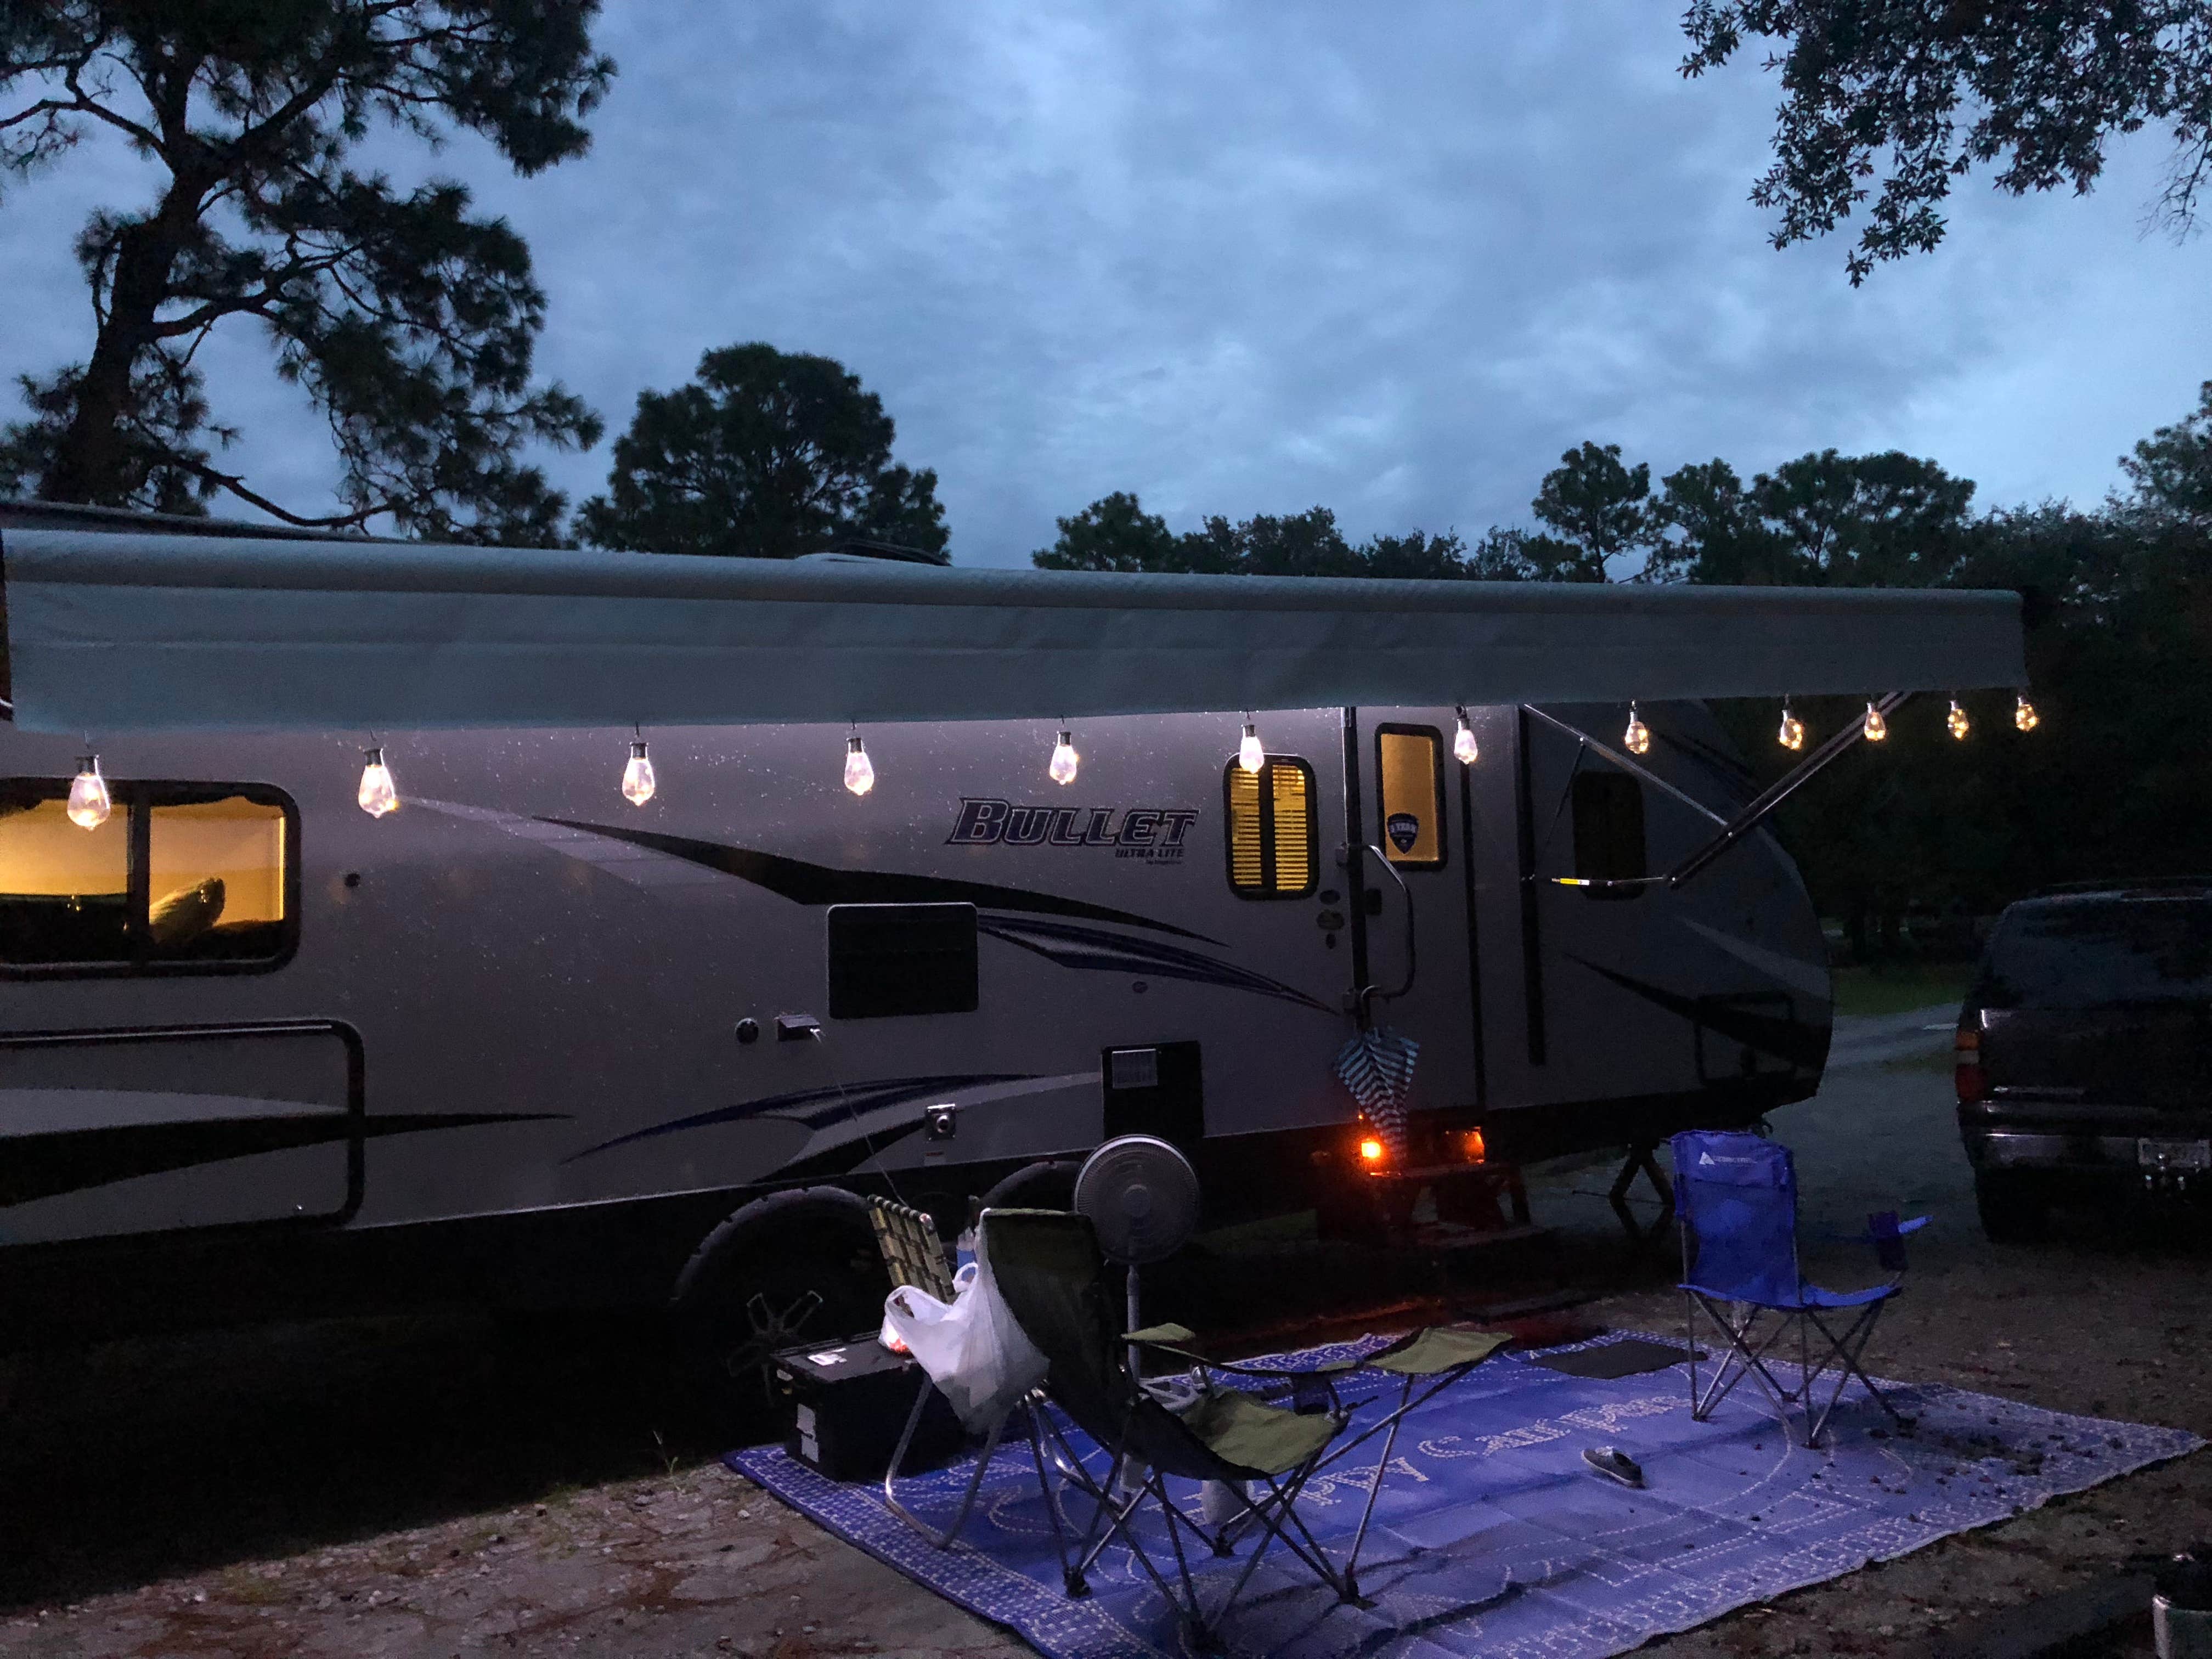 Our camper all lit up:)